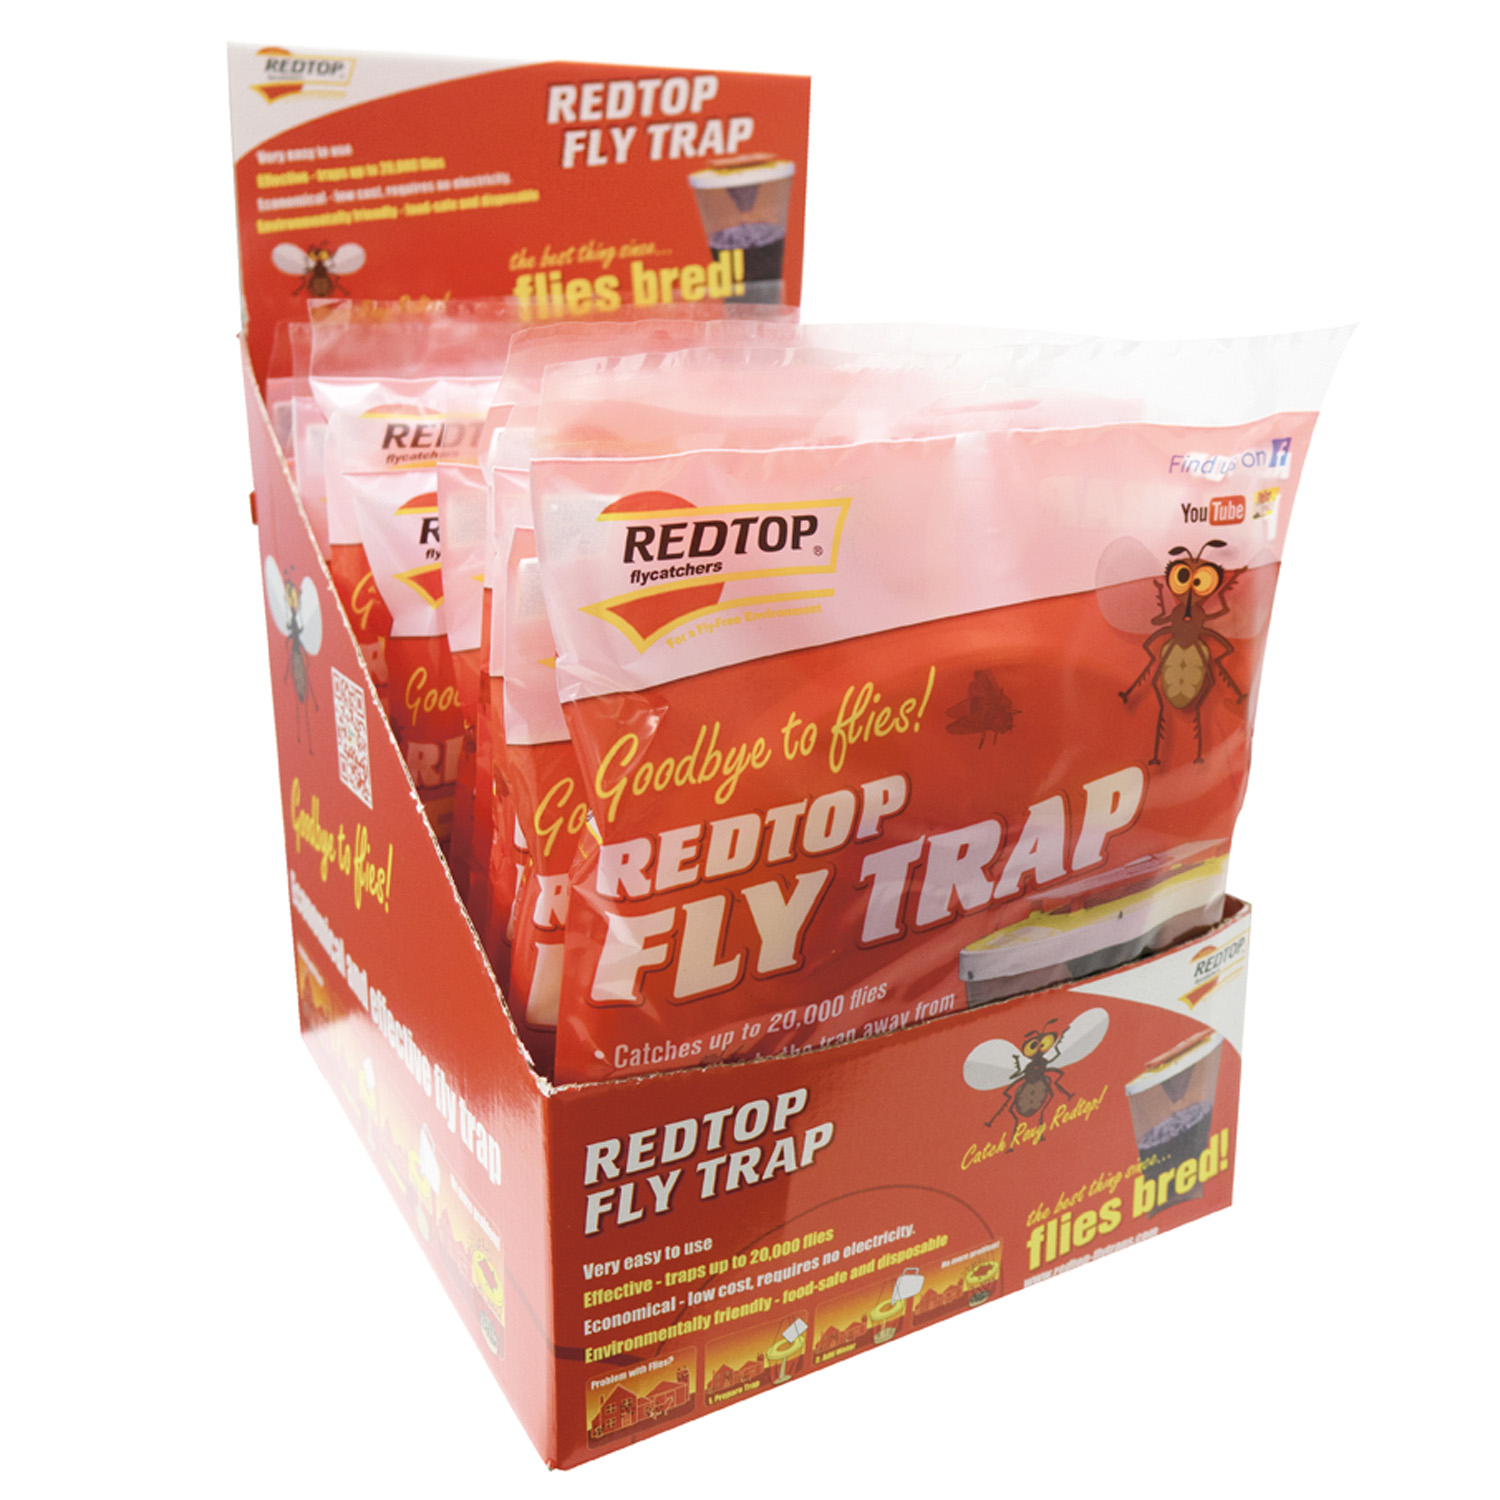 REDTOP FLY TRAP POS COUNTER DISPLAY BOX 10 TRAPS N/A